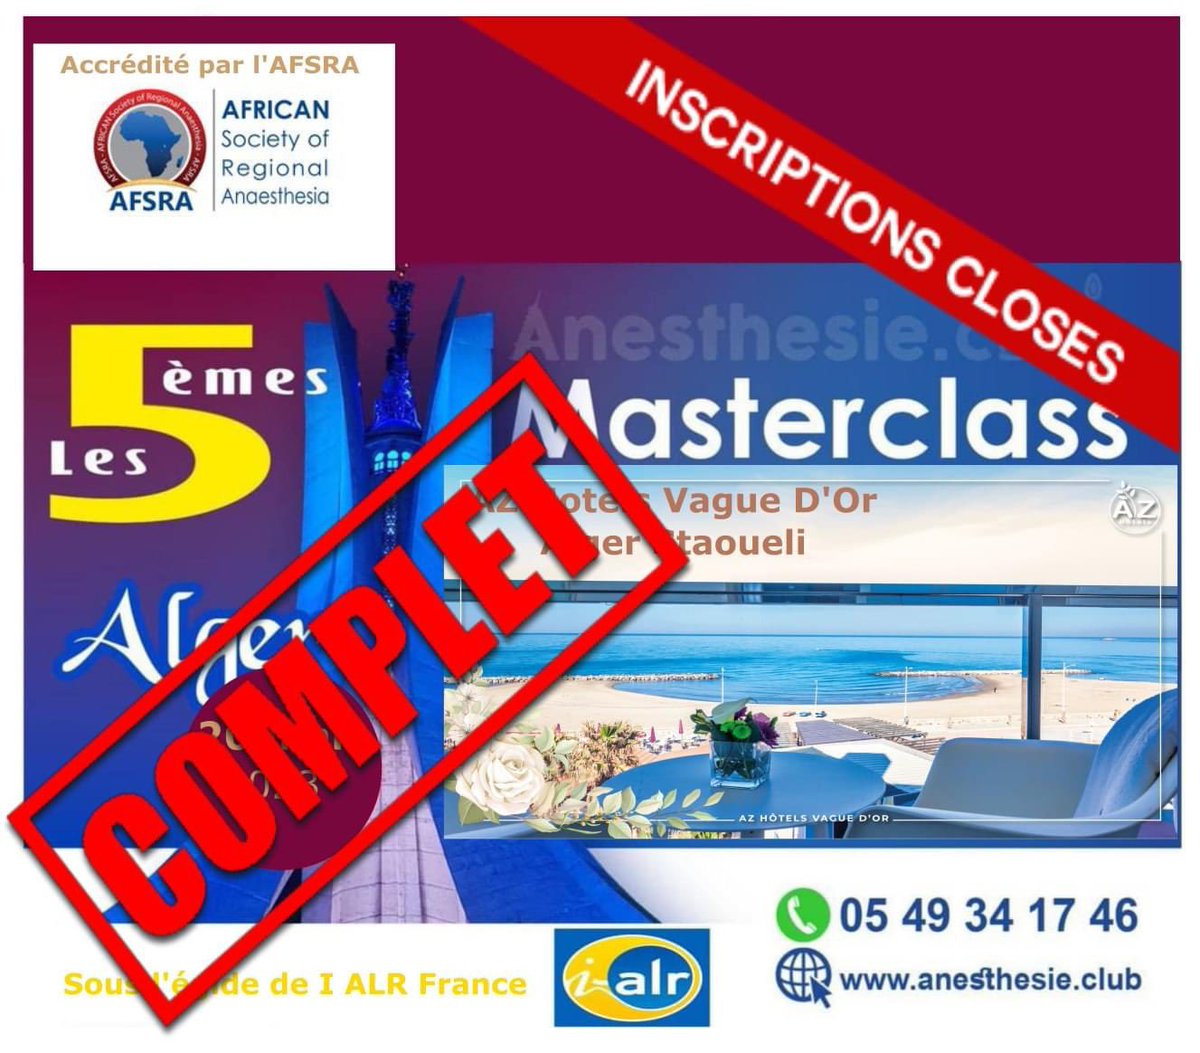 This year, all scheduled #RegionalAnesthesia #Masterclass were sold out two weeks before the event.We are delighted to see that there is interest in our events.The next session will be held in #Algiers on October 20 -21 2023 #AzHotel  Vague d’or